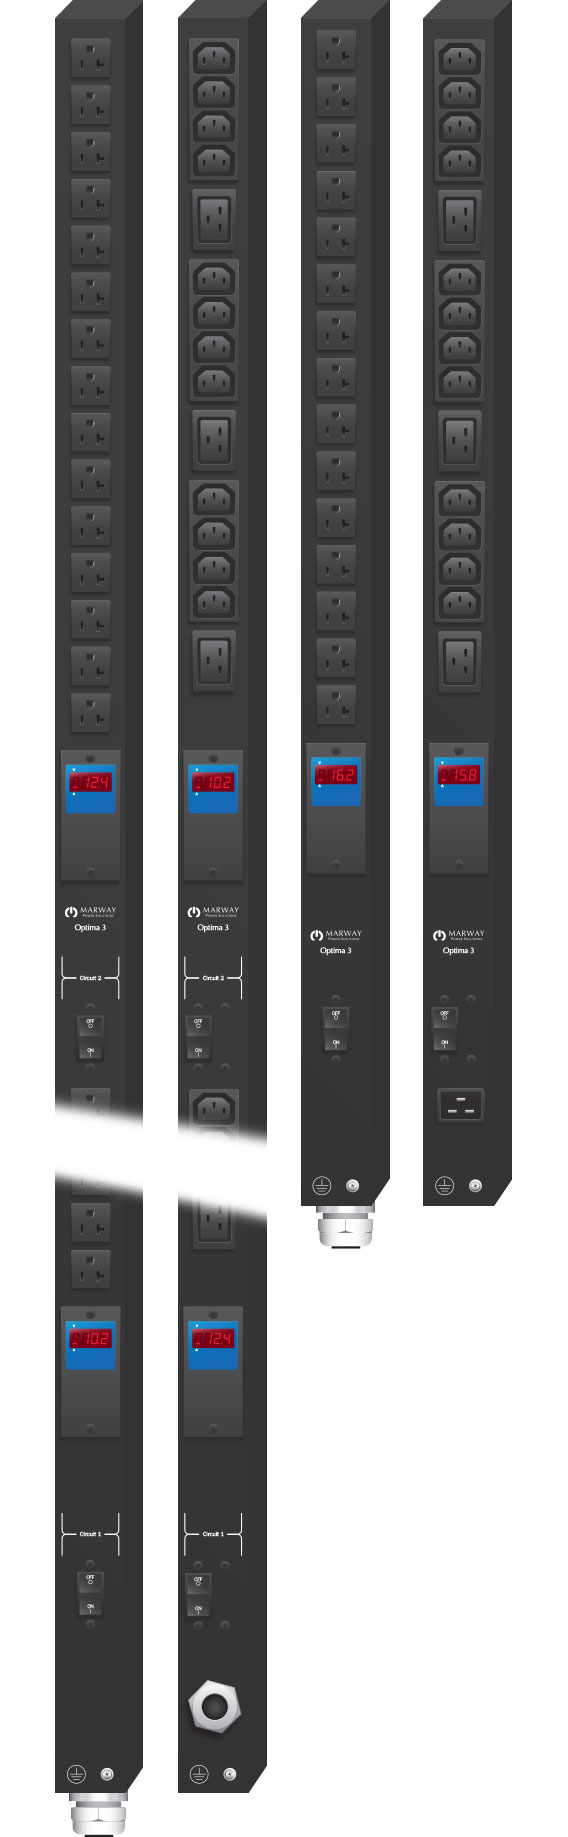 Product examples from the line of Marway's Optima 329 vertical 0U single-phase PDUs.